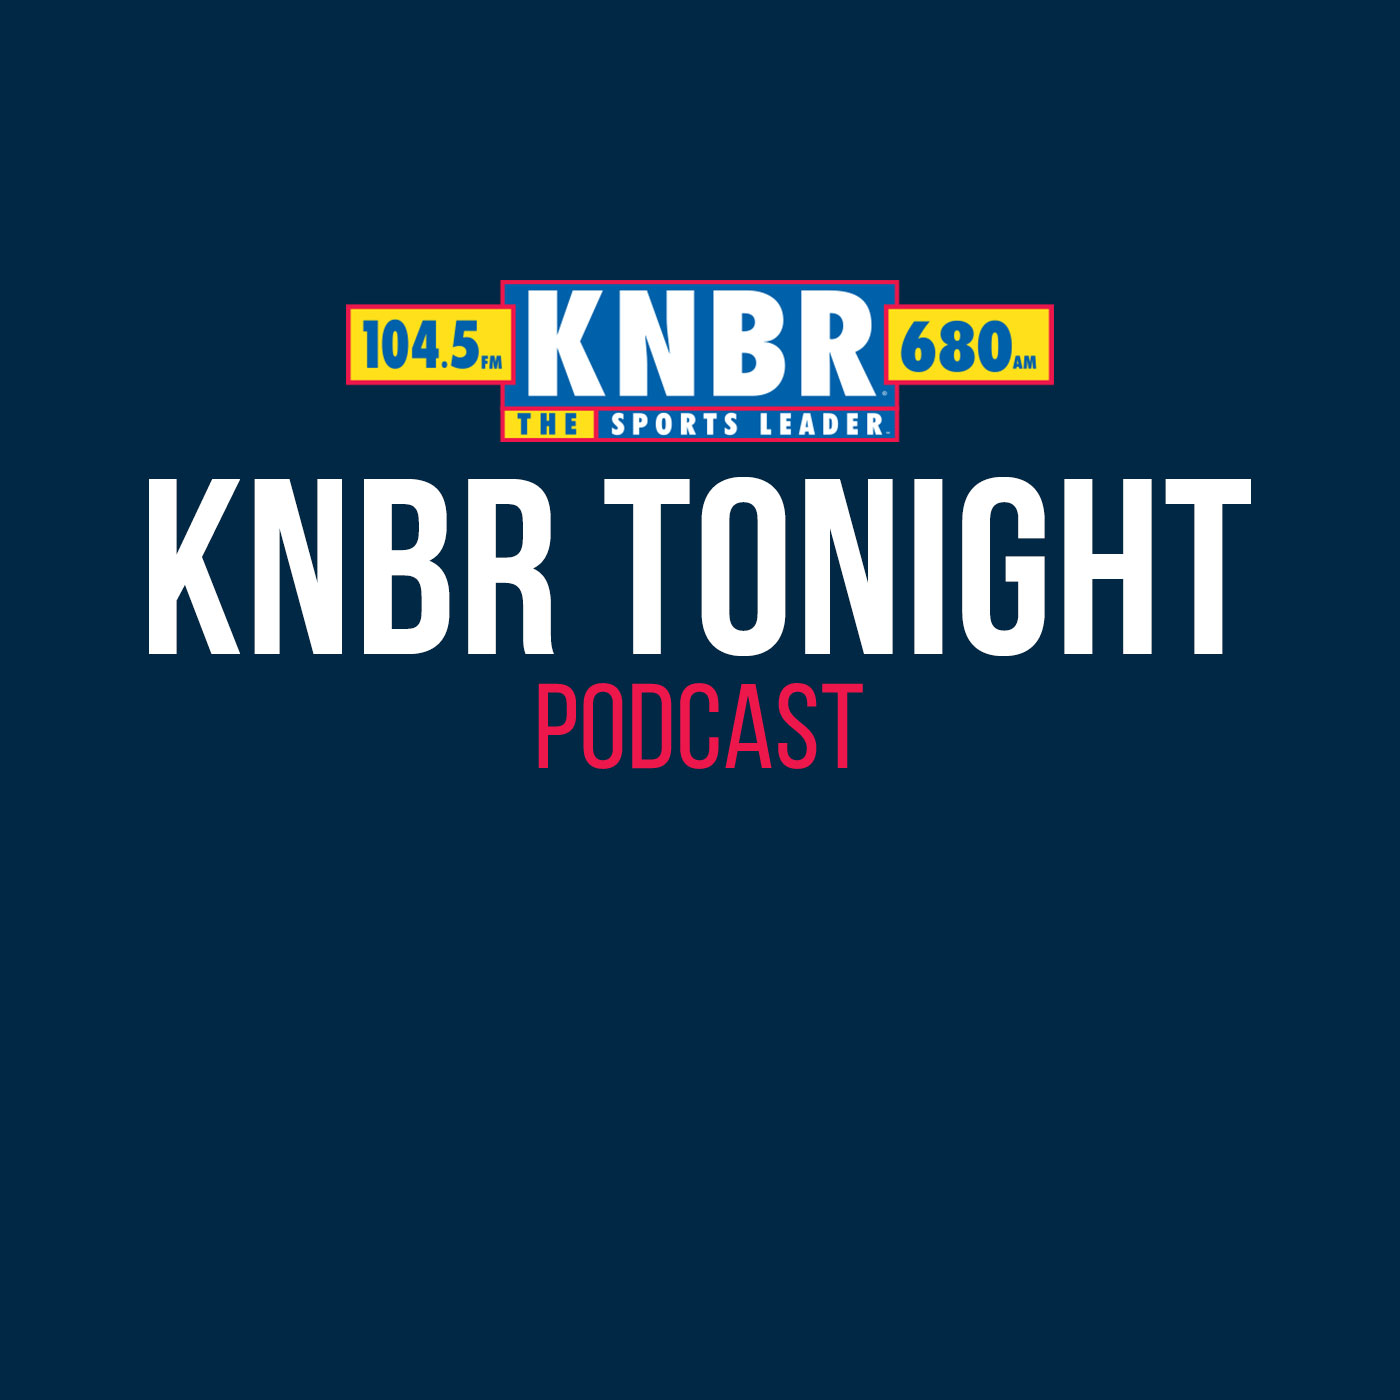 11-10 Matt Barrows joins Kerry Crowley  on KNBR Tonight to discuss the 49ers issues and the challenges of their Monday Night matchup against the Rams